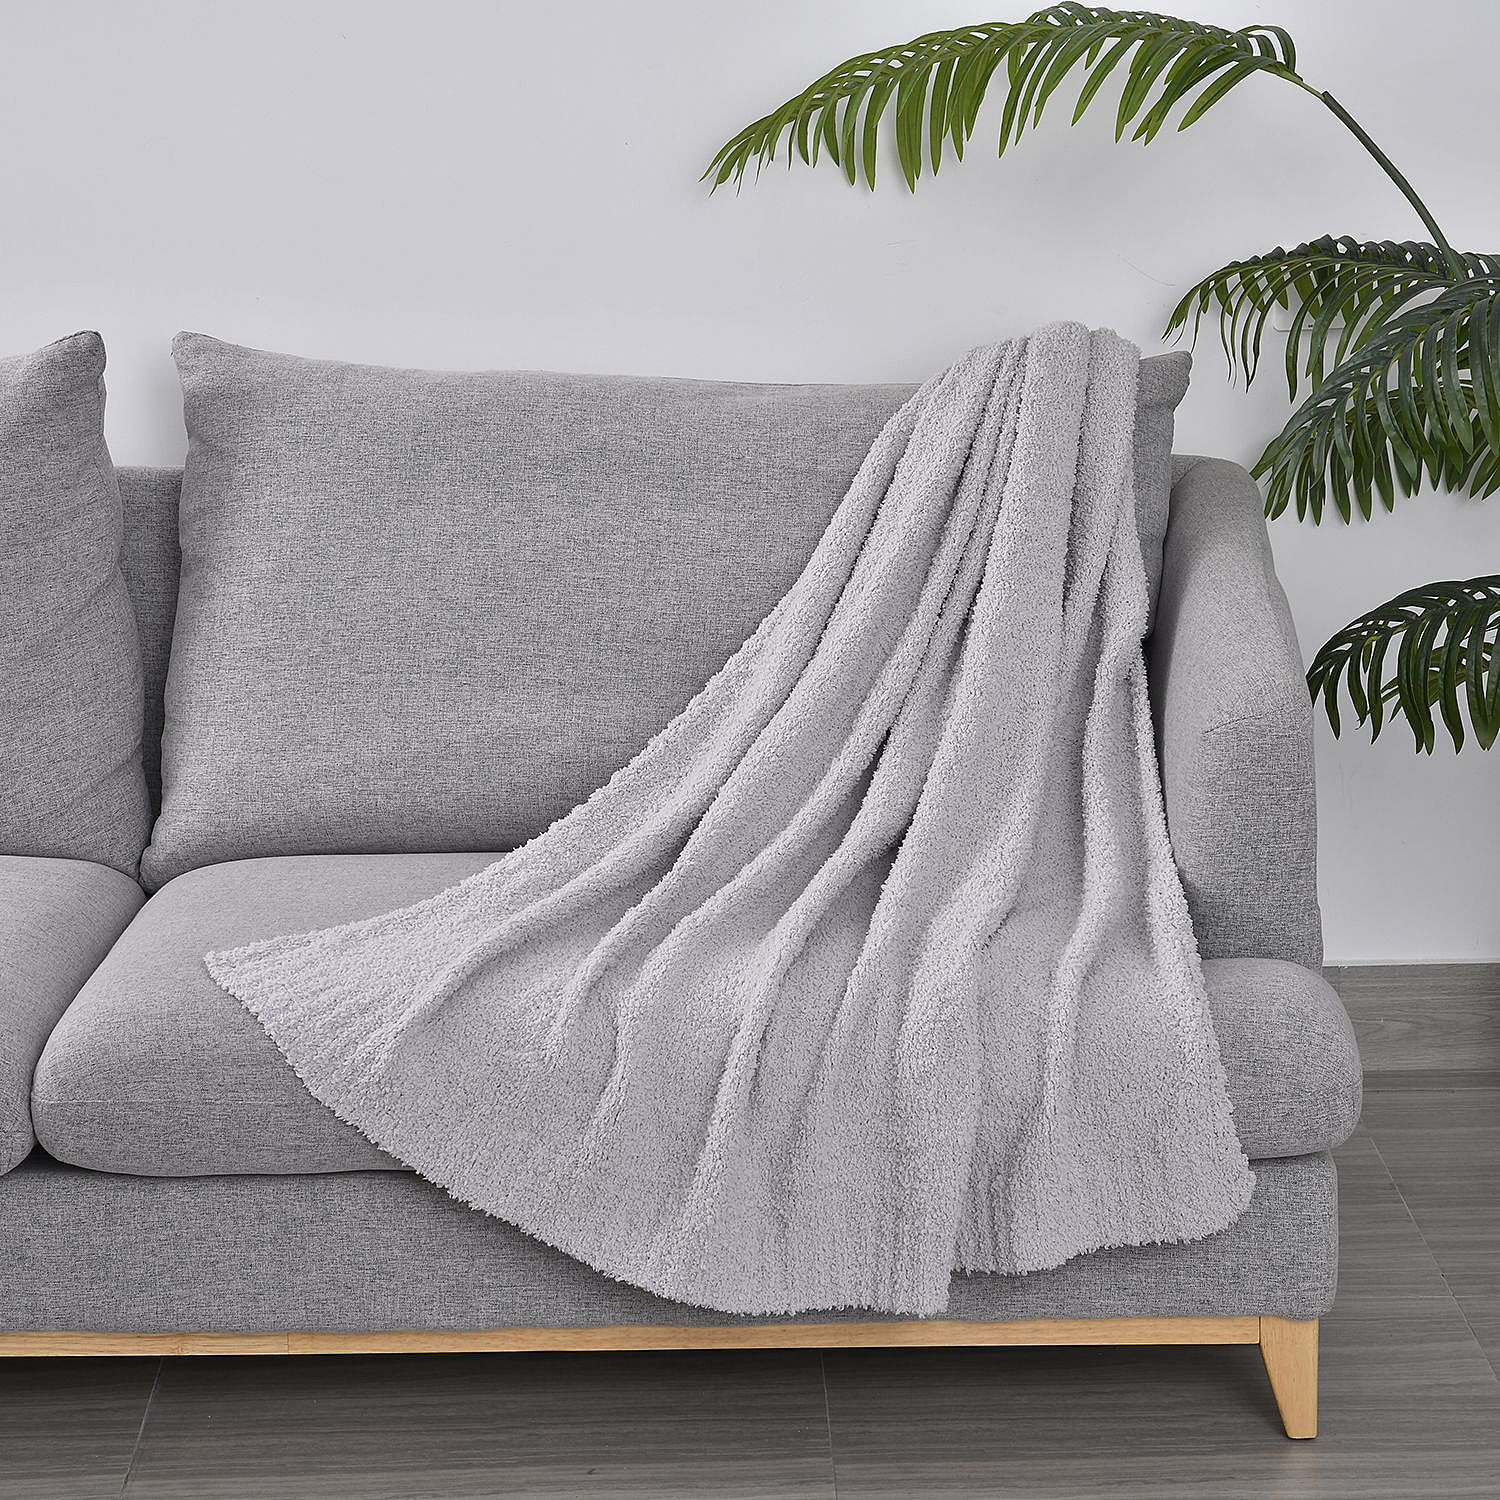 Solid-Colour-Cozy-Microfiber-Knitted-Blanket-(Size-127x152-Cm)-Grey